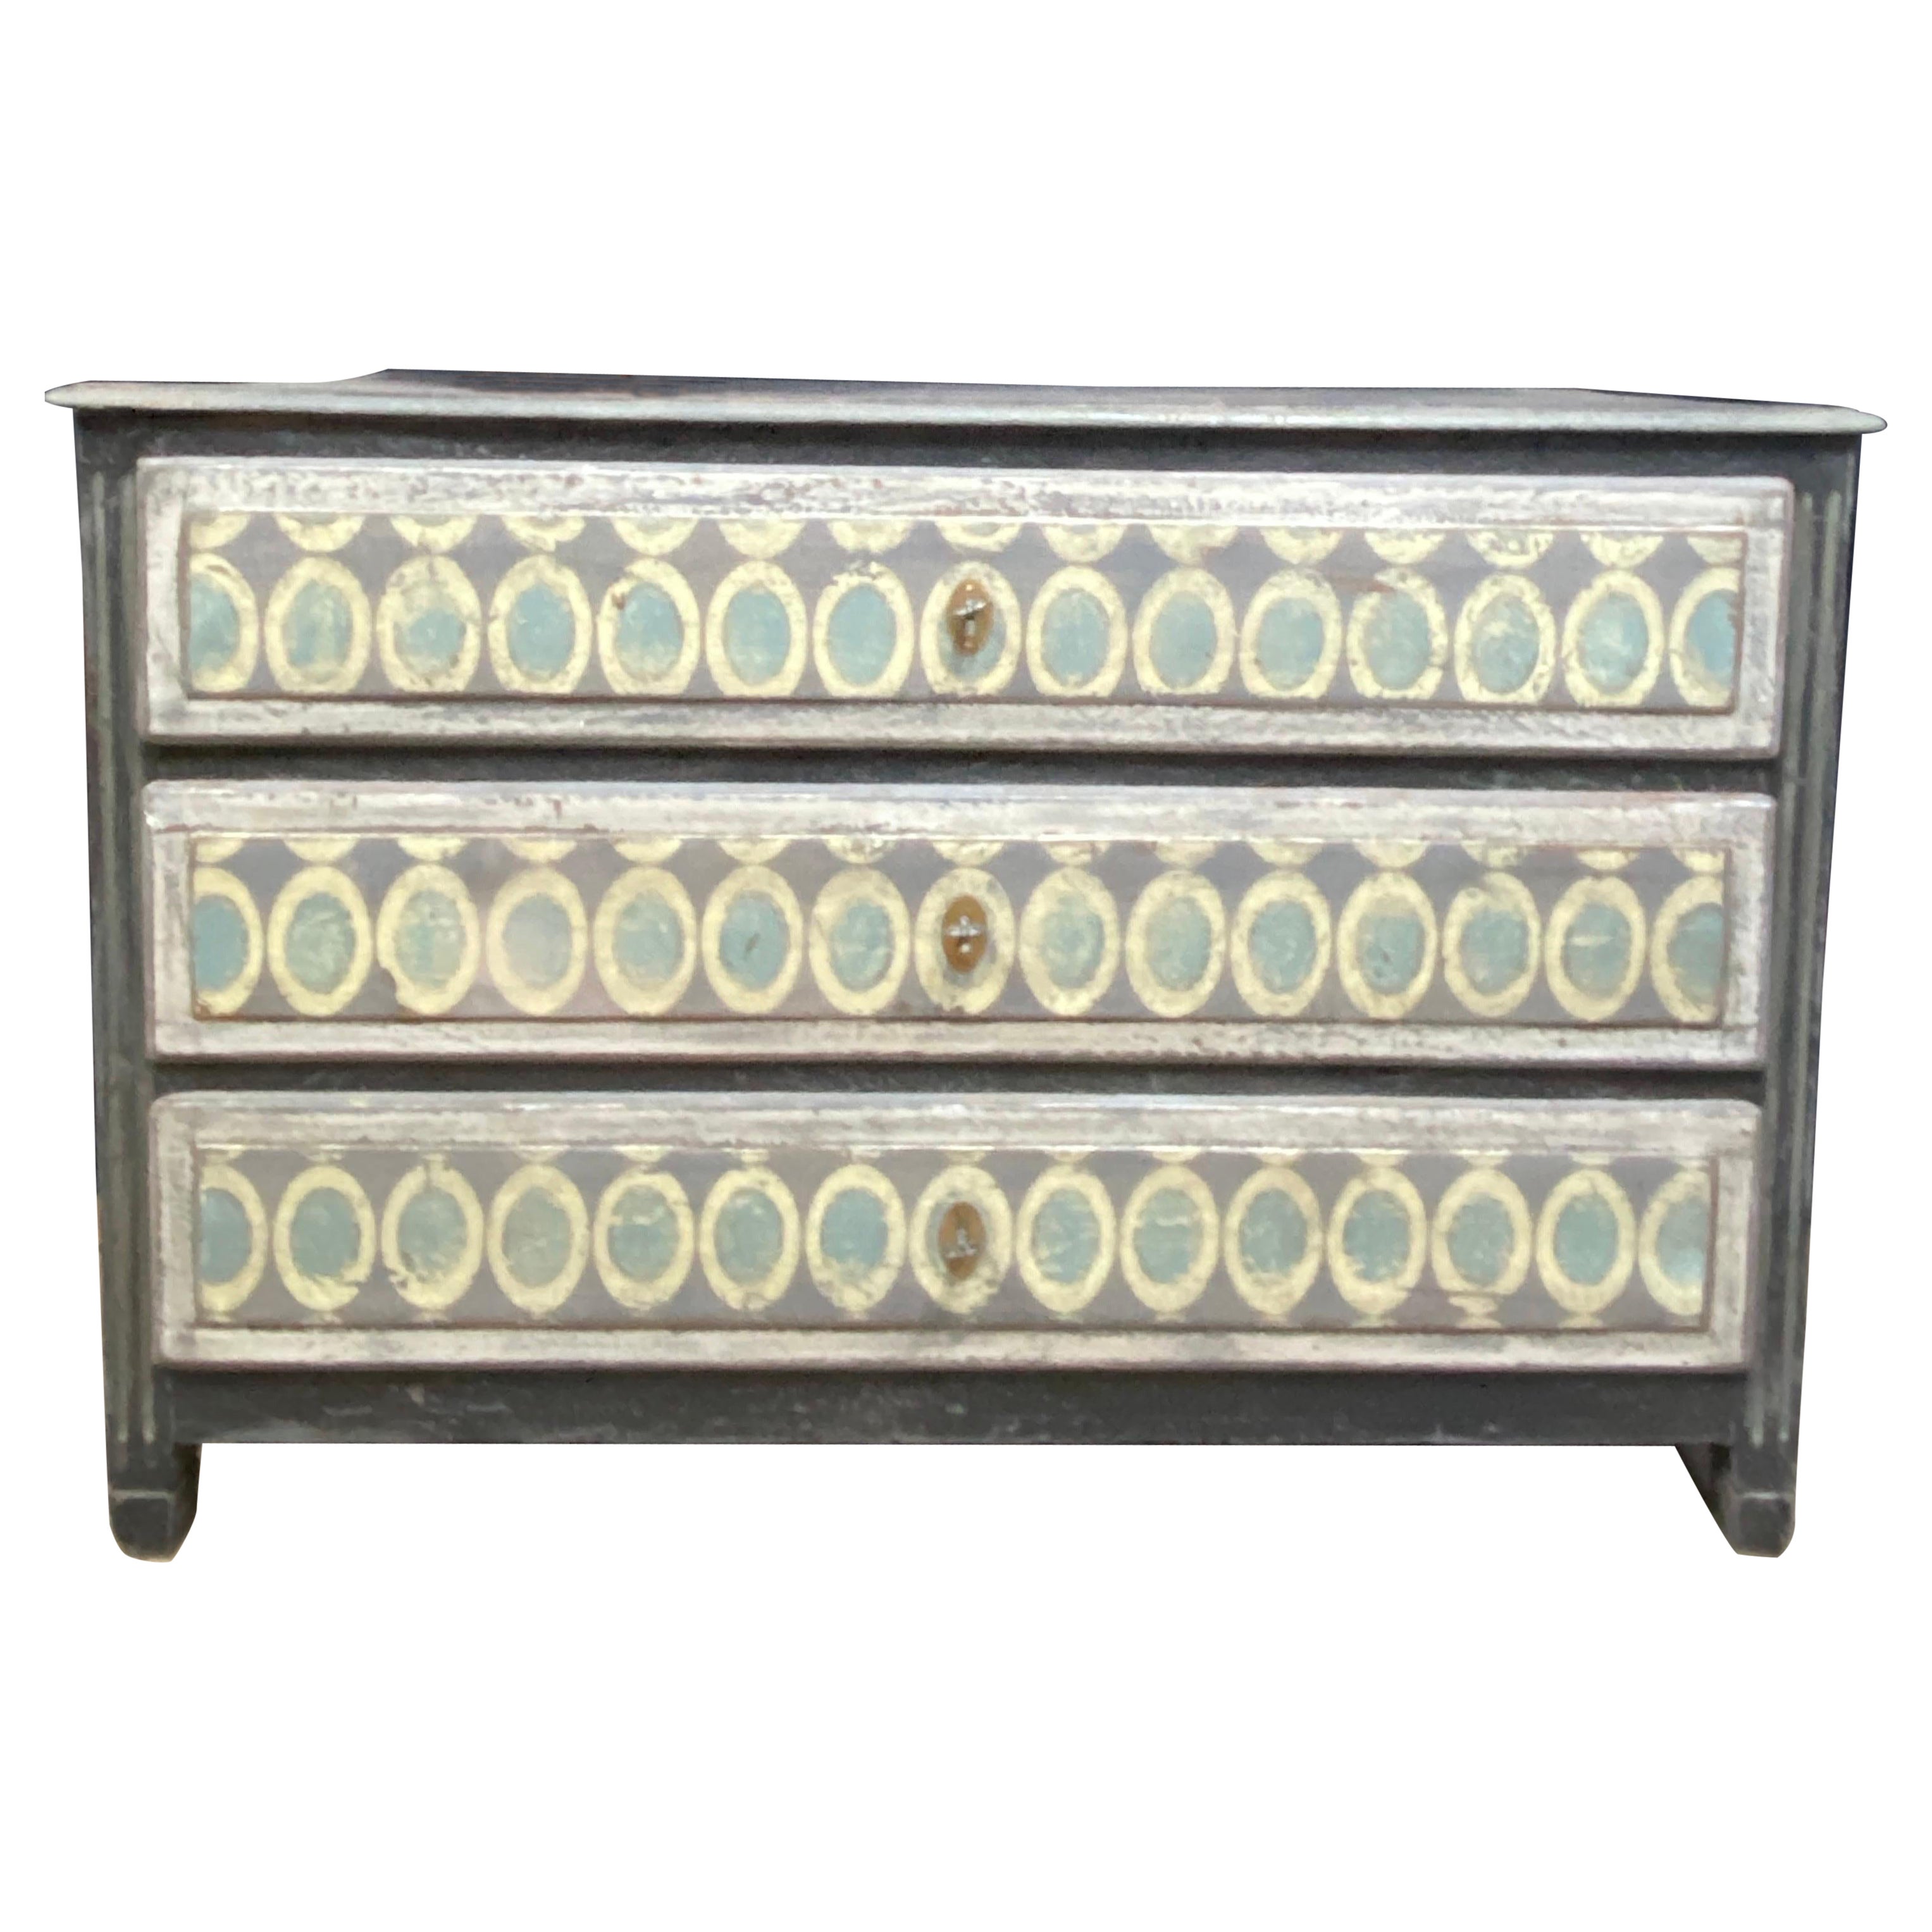 Louis xvi chest of drawers 3 patina drawers with different shapes and colors